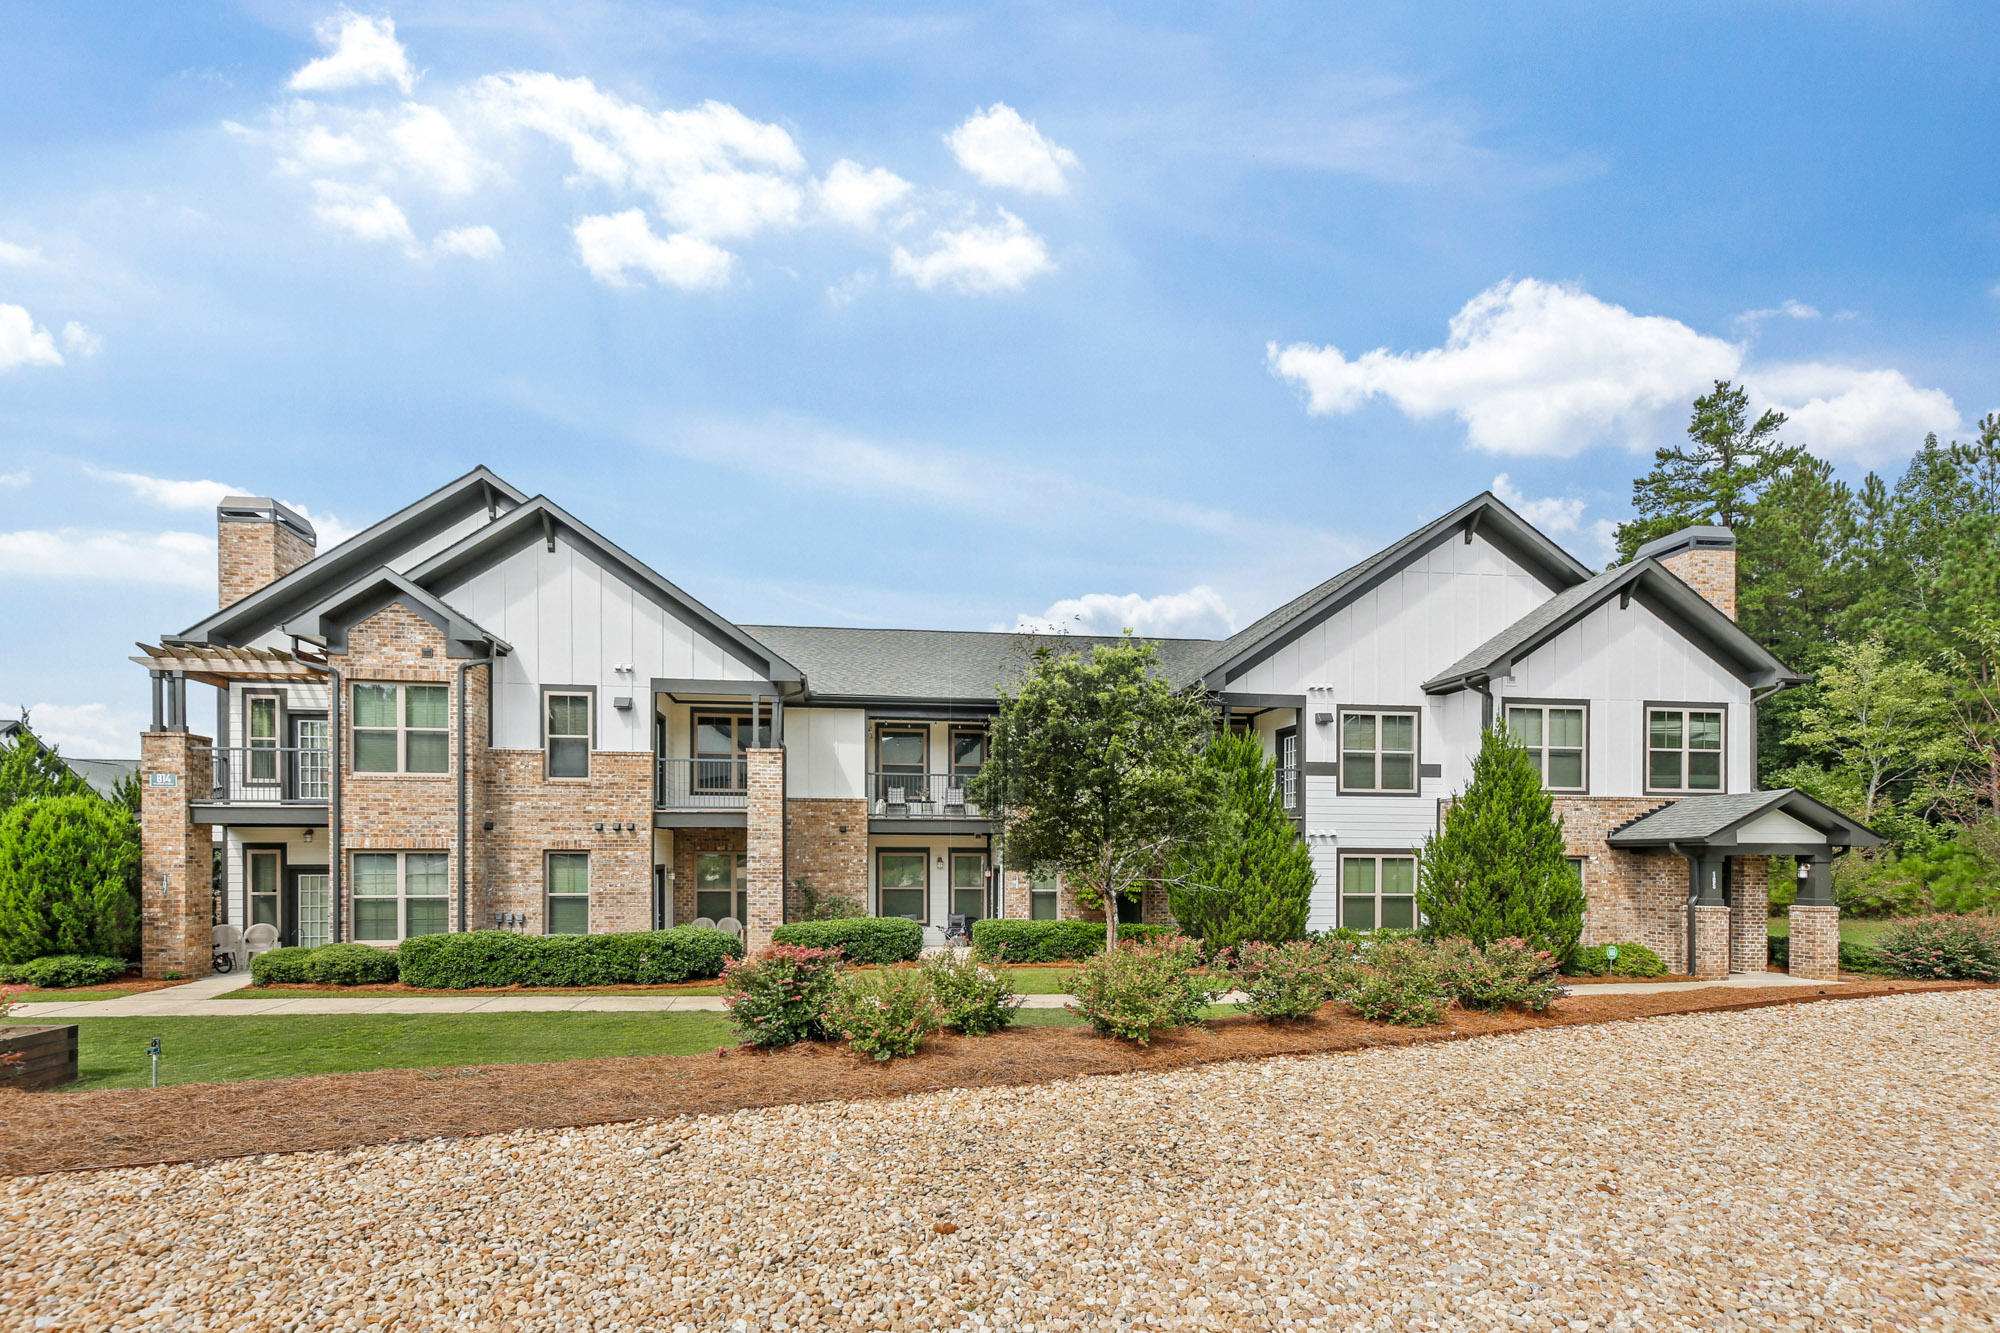 The exterior of Park 9 apartments in Woodstock, GA.